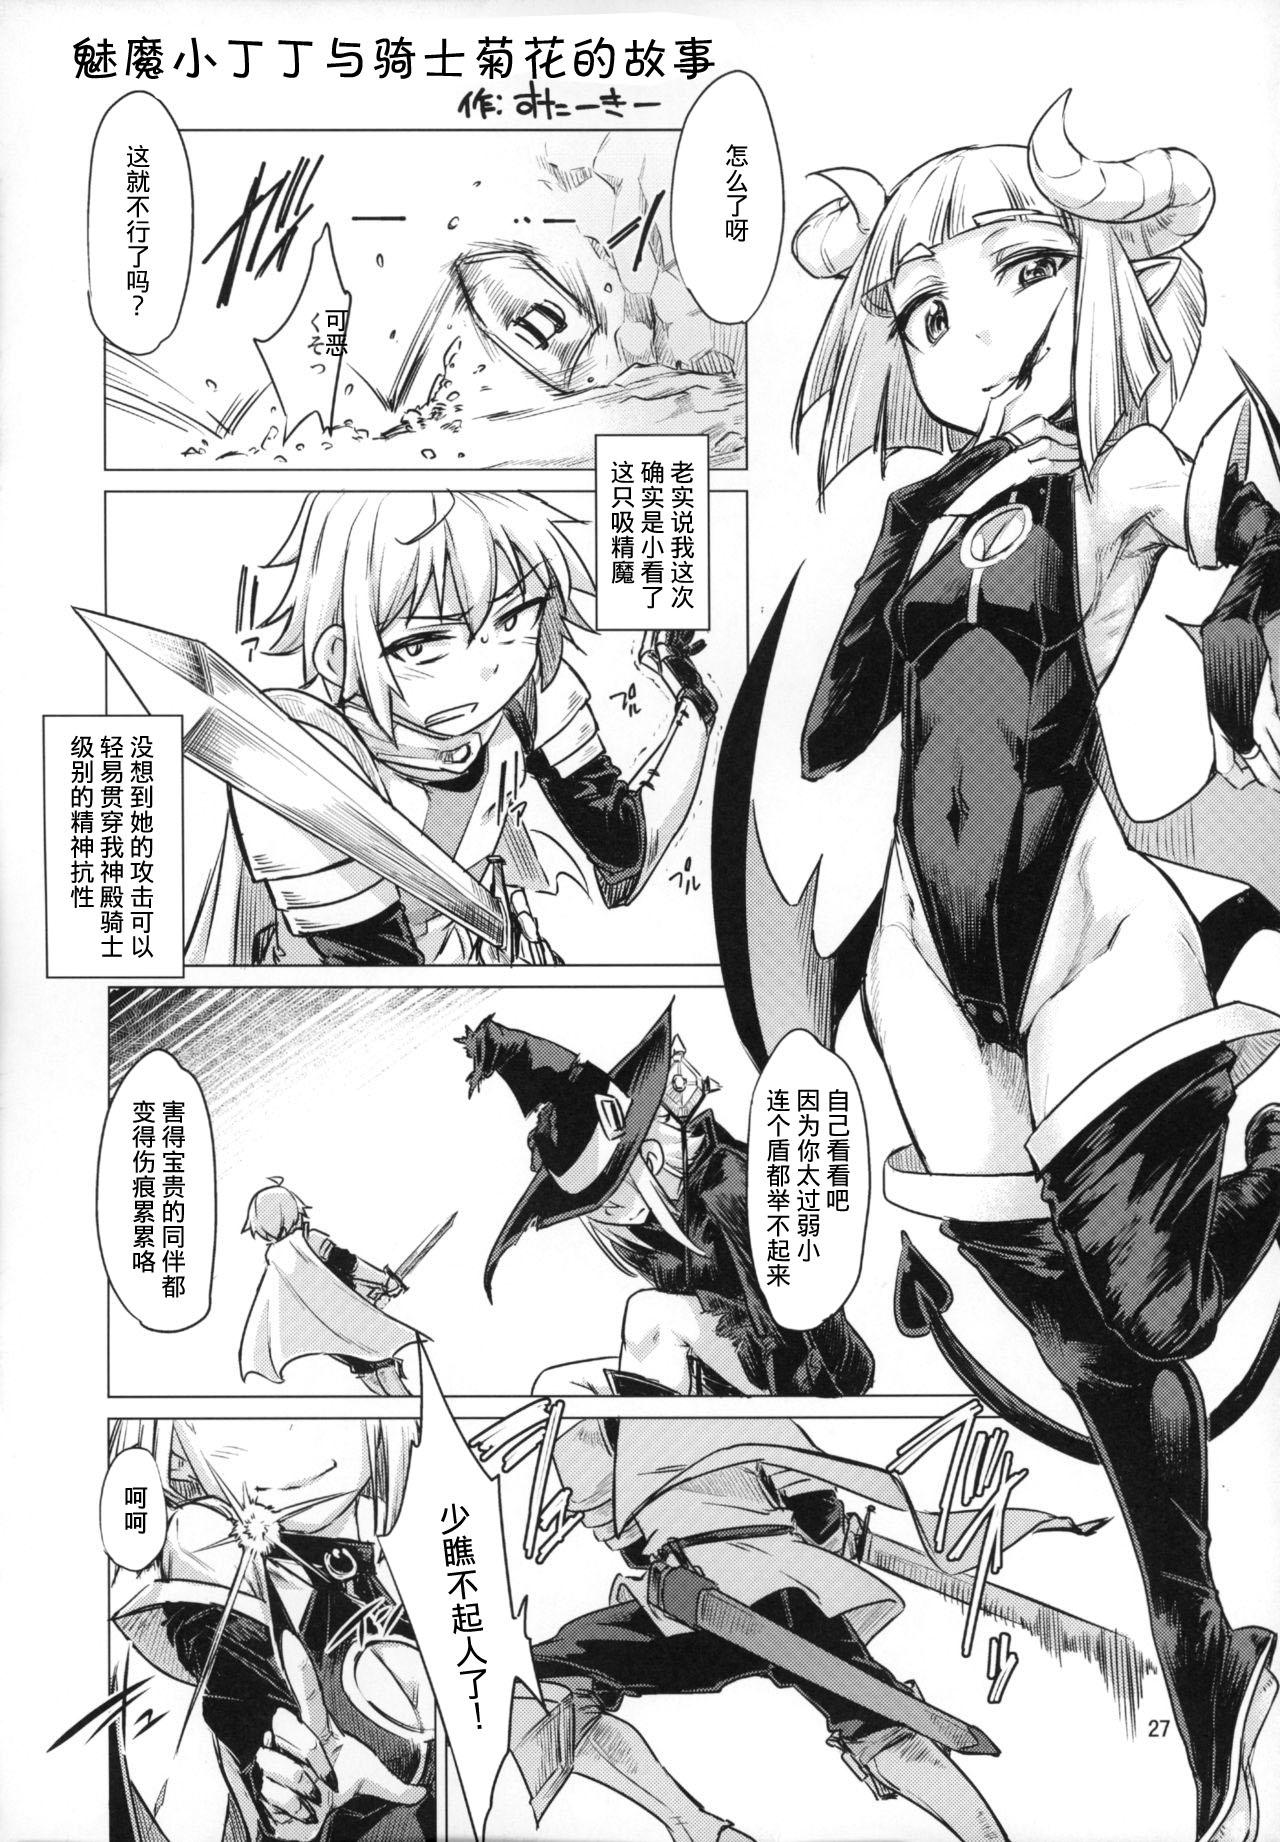 Nylons Succubus Molesting a Knight with Her Cock - Original Metendo - Page 2